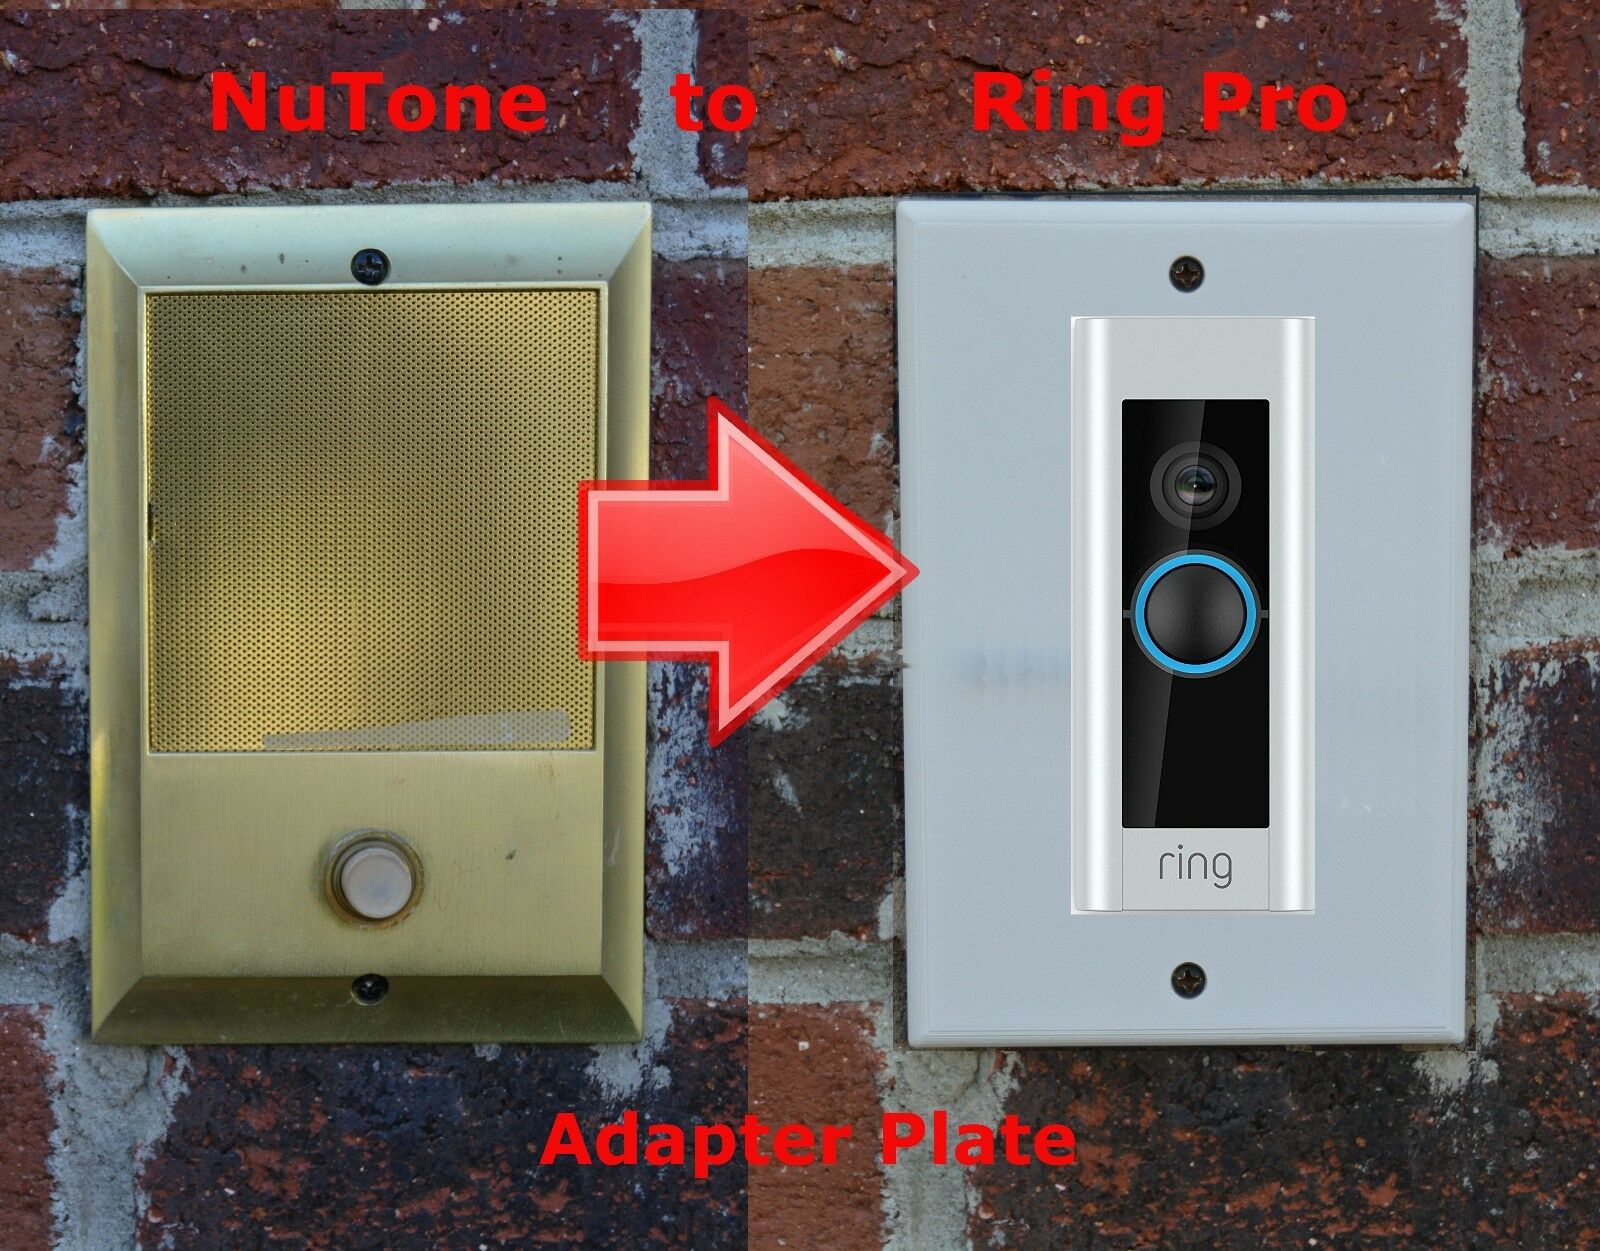 Ring Pro Doorbell Adapter Plate Nutone And M&s Intercom Systems Stainless Steel